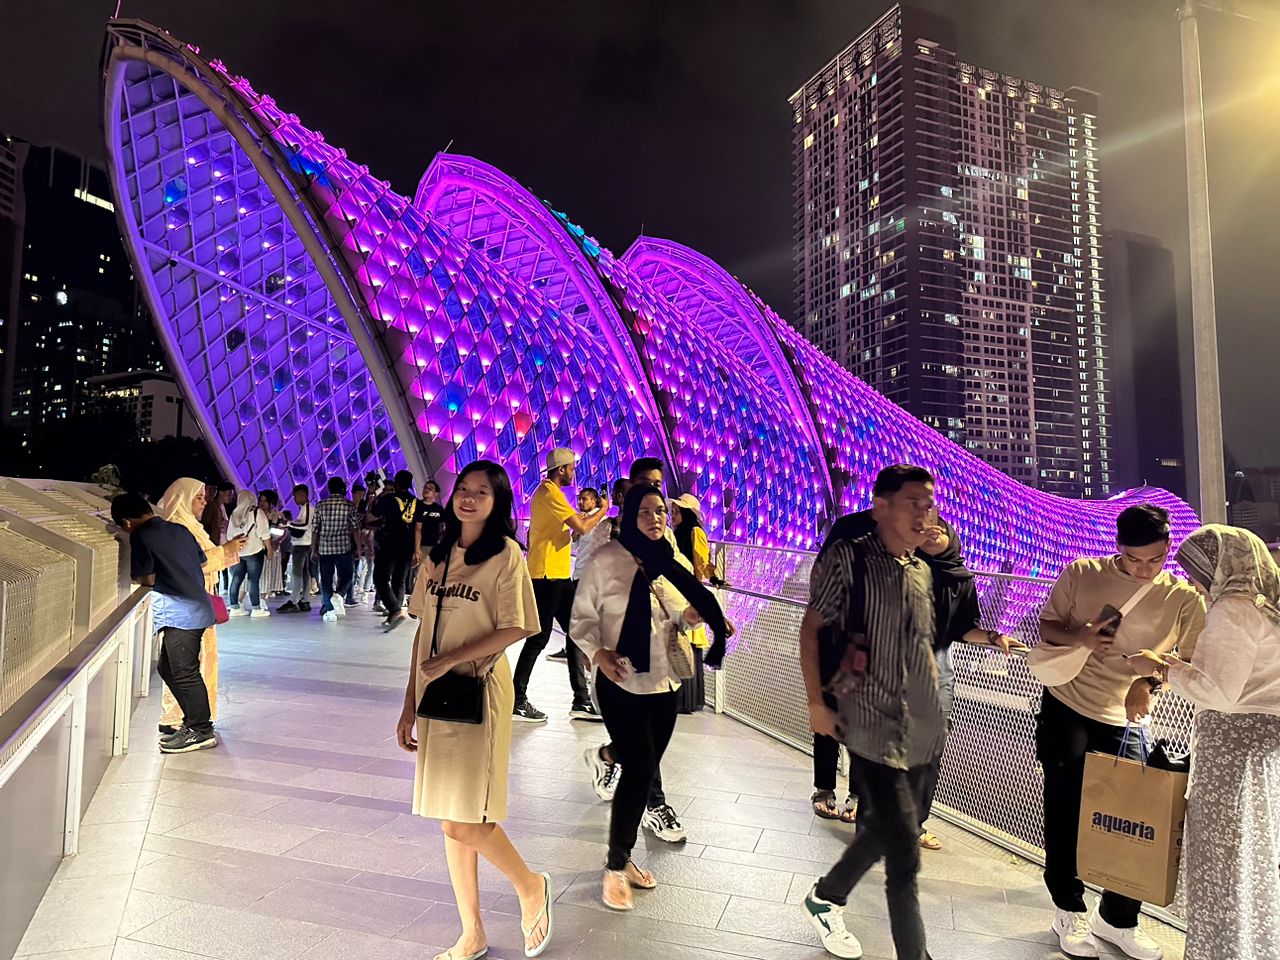 Pintasan-Saloma- bridge- what-do-to-in-kl-at-night-nighttime-attraction- things-to-do-in-kl-at-night-night-activities-night-attractions-in-kl